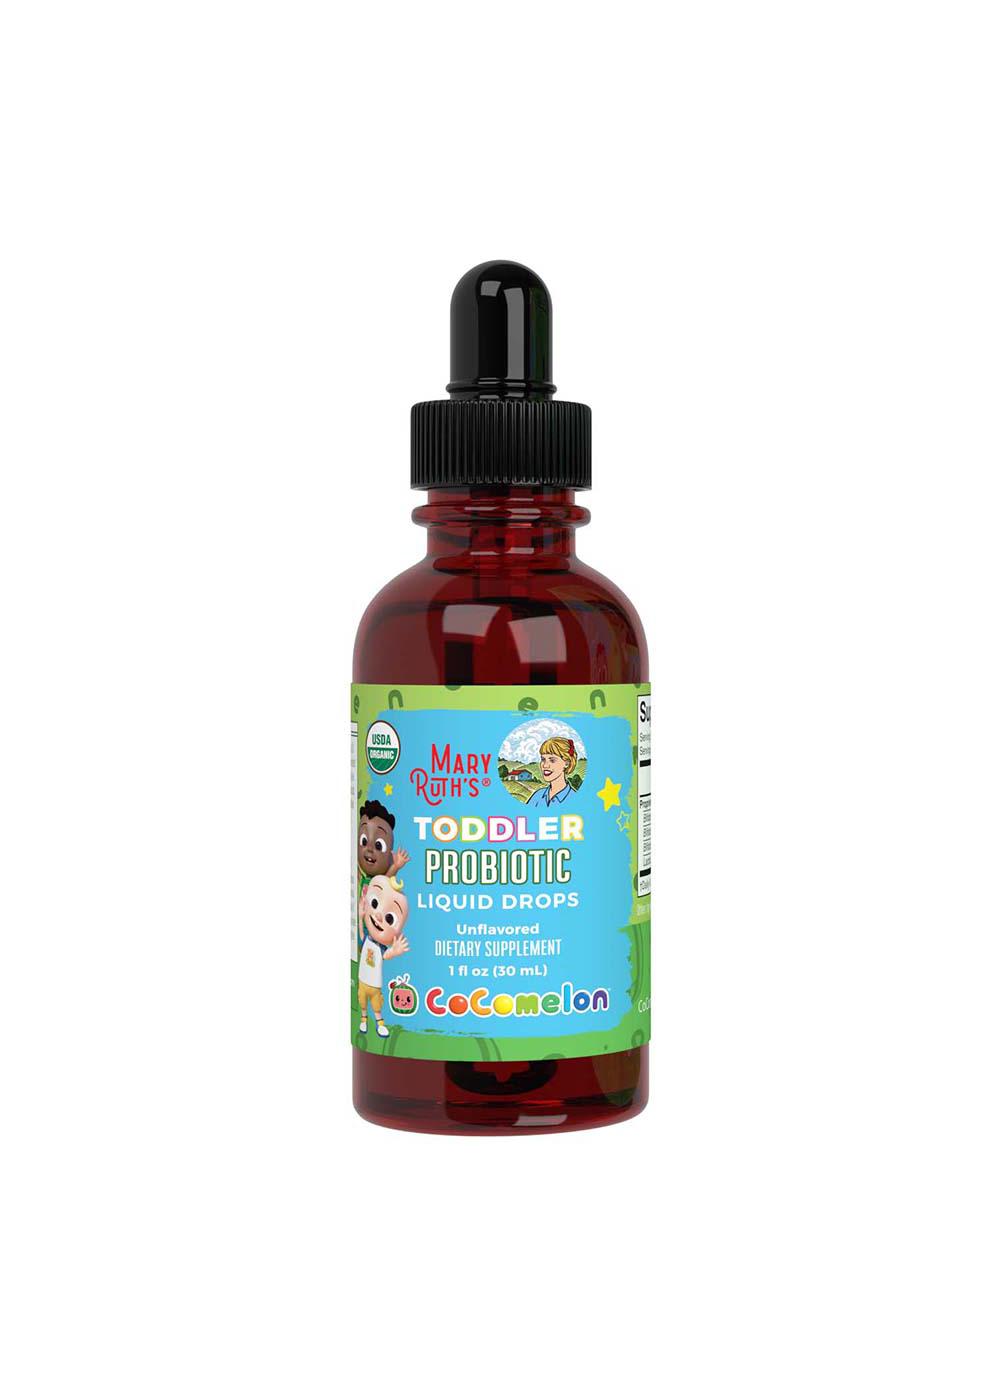 Mary Ruth's Toddler Probiotic Liquid Drops - Unflavored; image 2 of 2